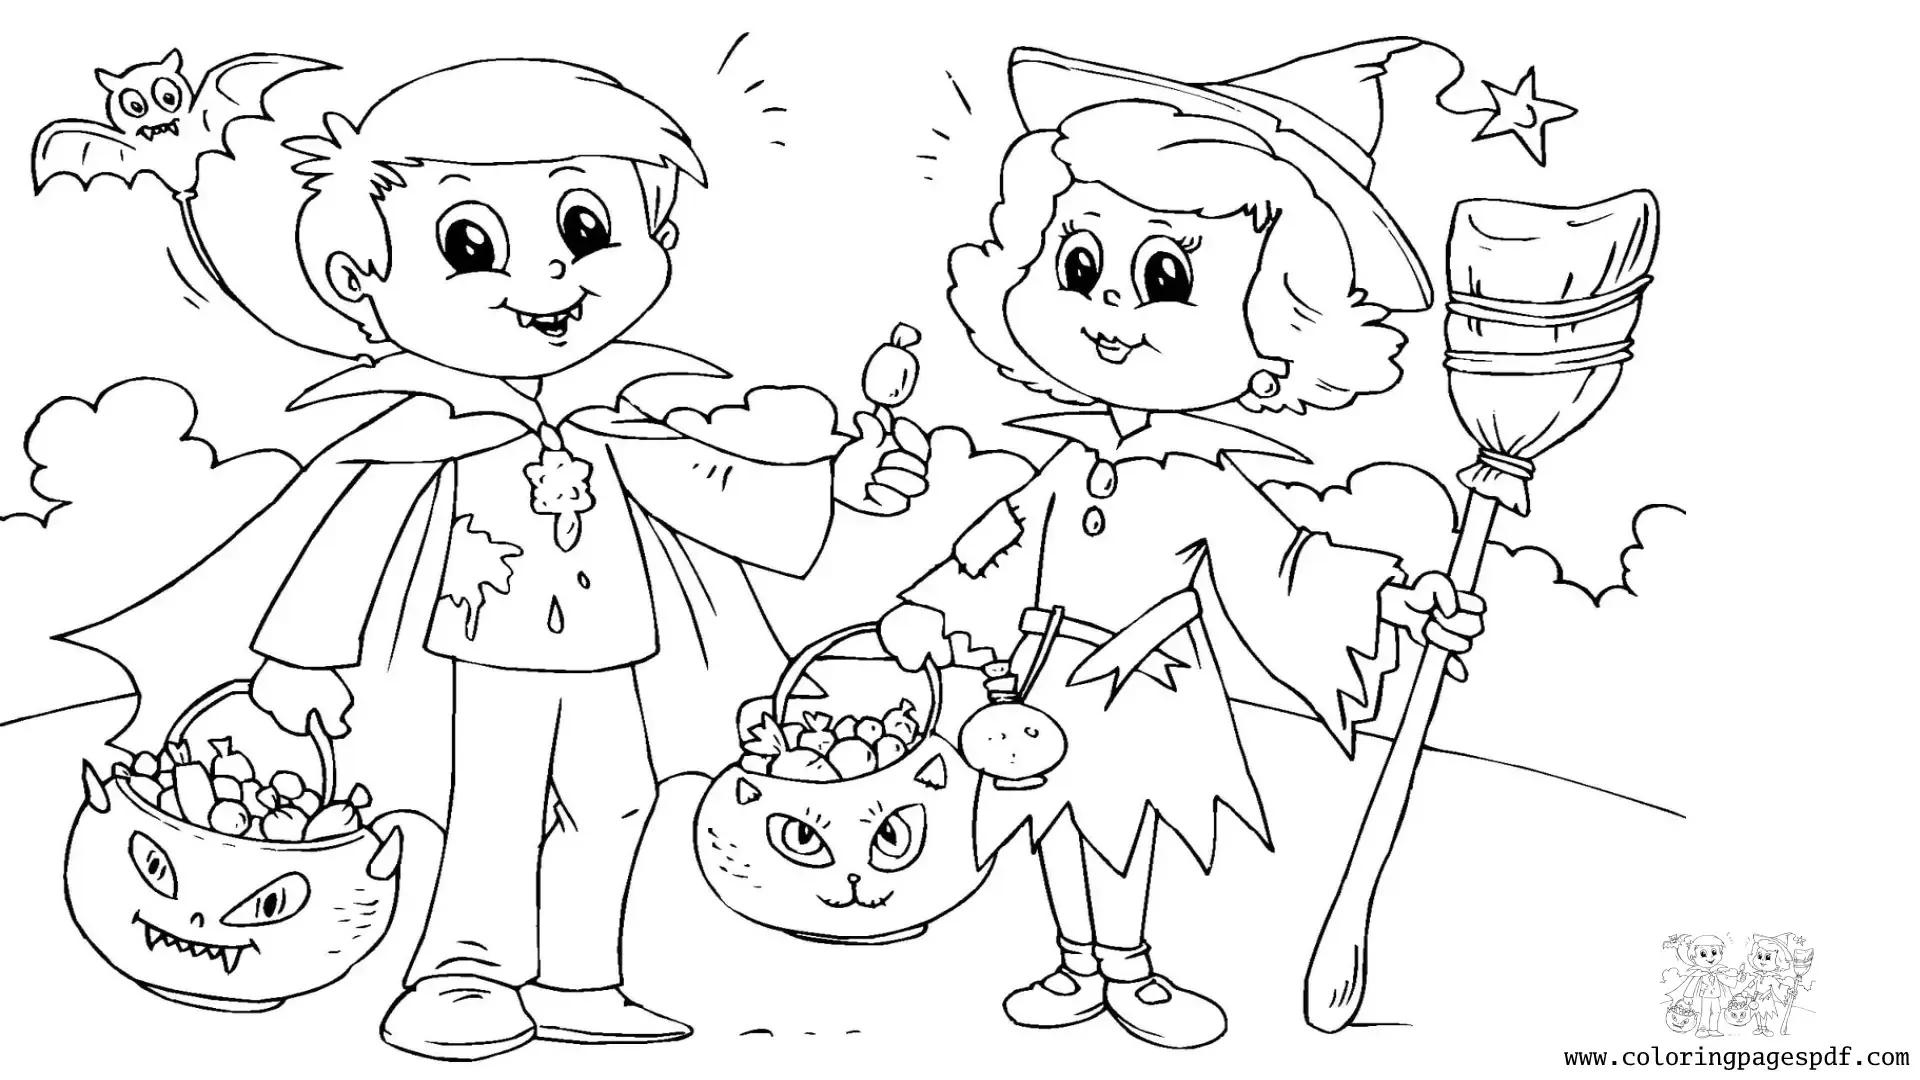 Coloring Page Of Two Kids With Halloween Costumes